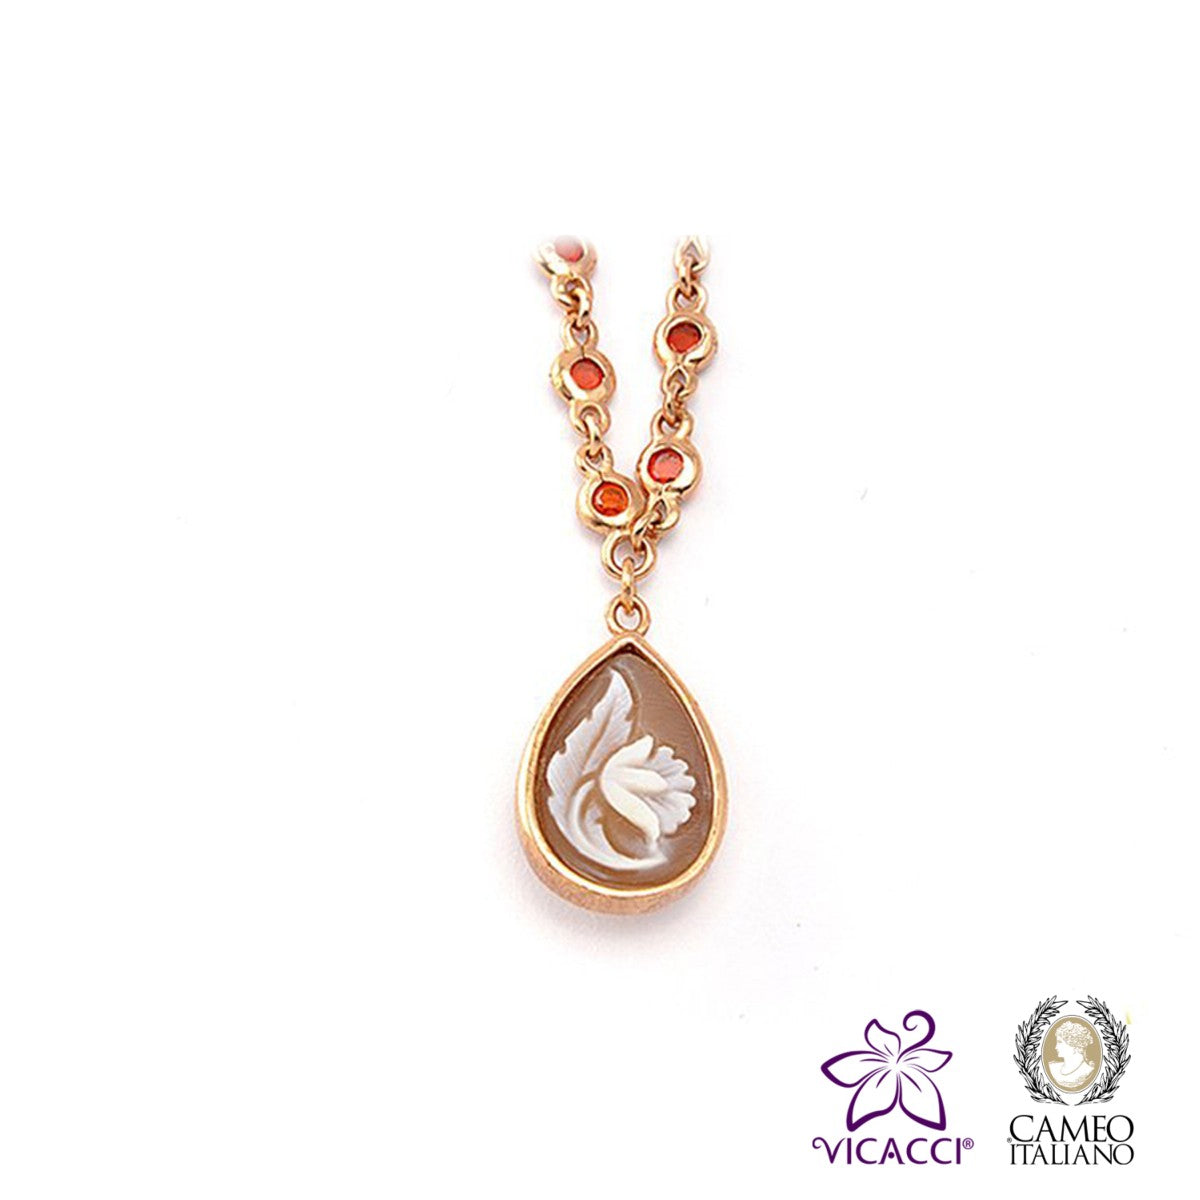 Cameo Italiano, C5 Necklace , Rose Gold Plated Sterling Silver